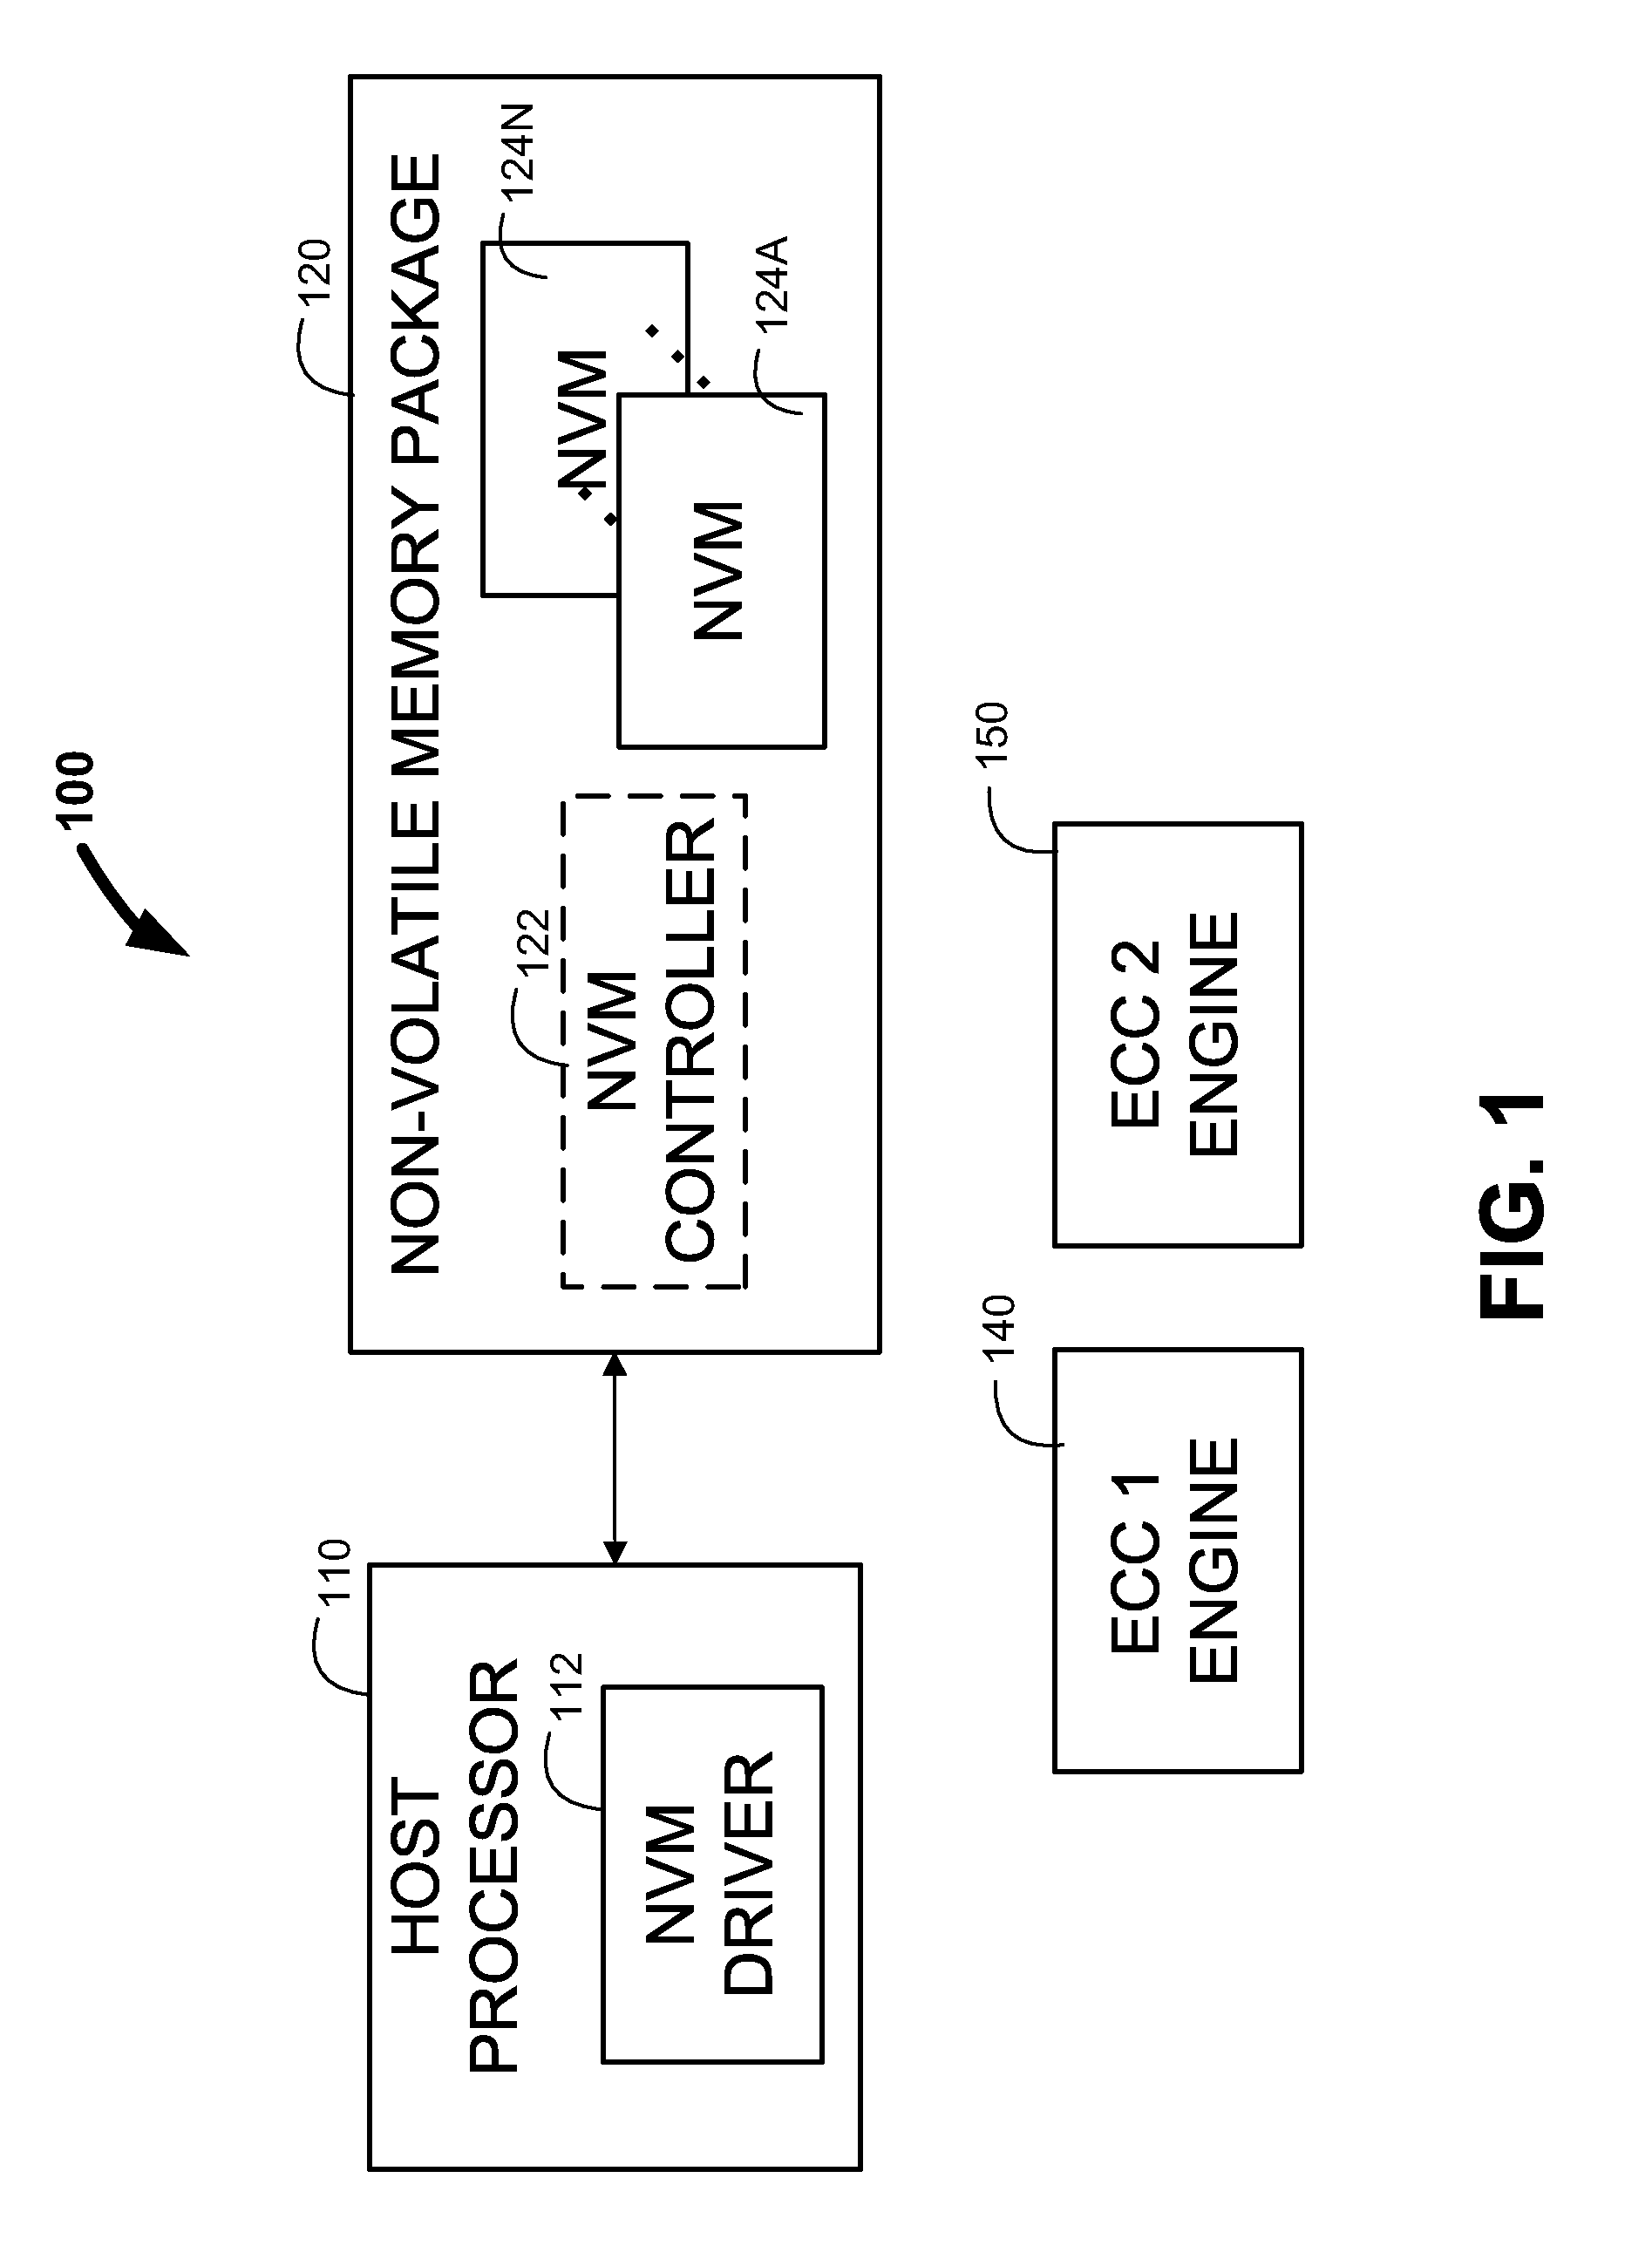 Management of a non-volatile memory based on test quality